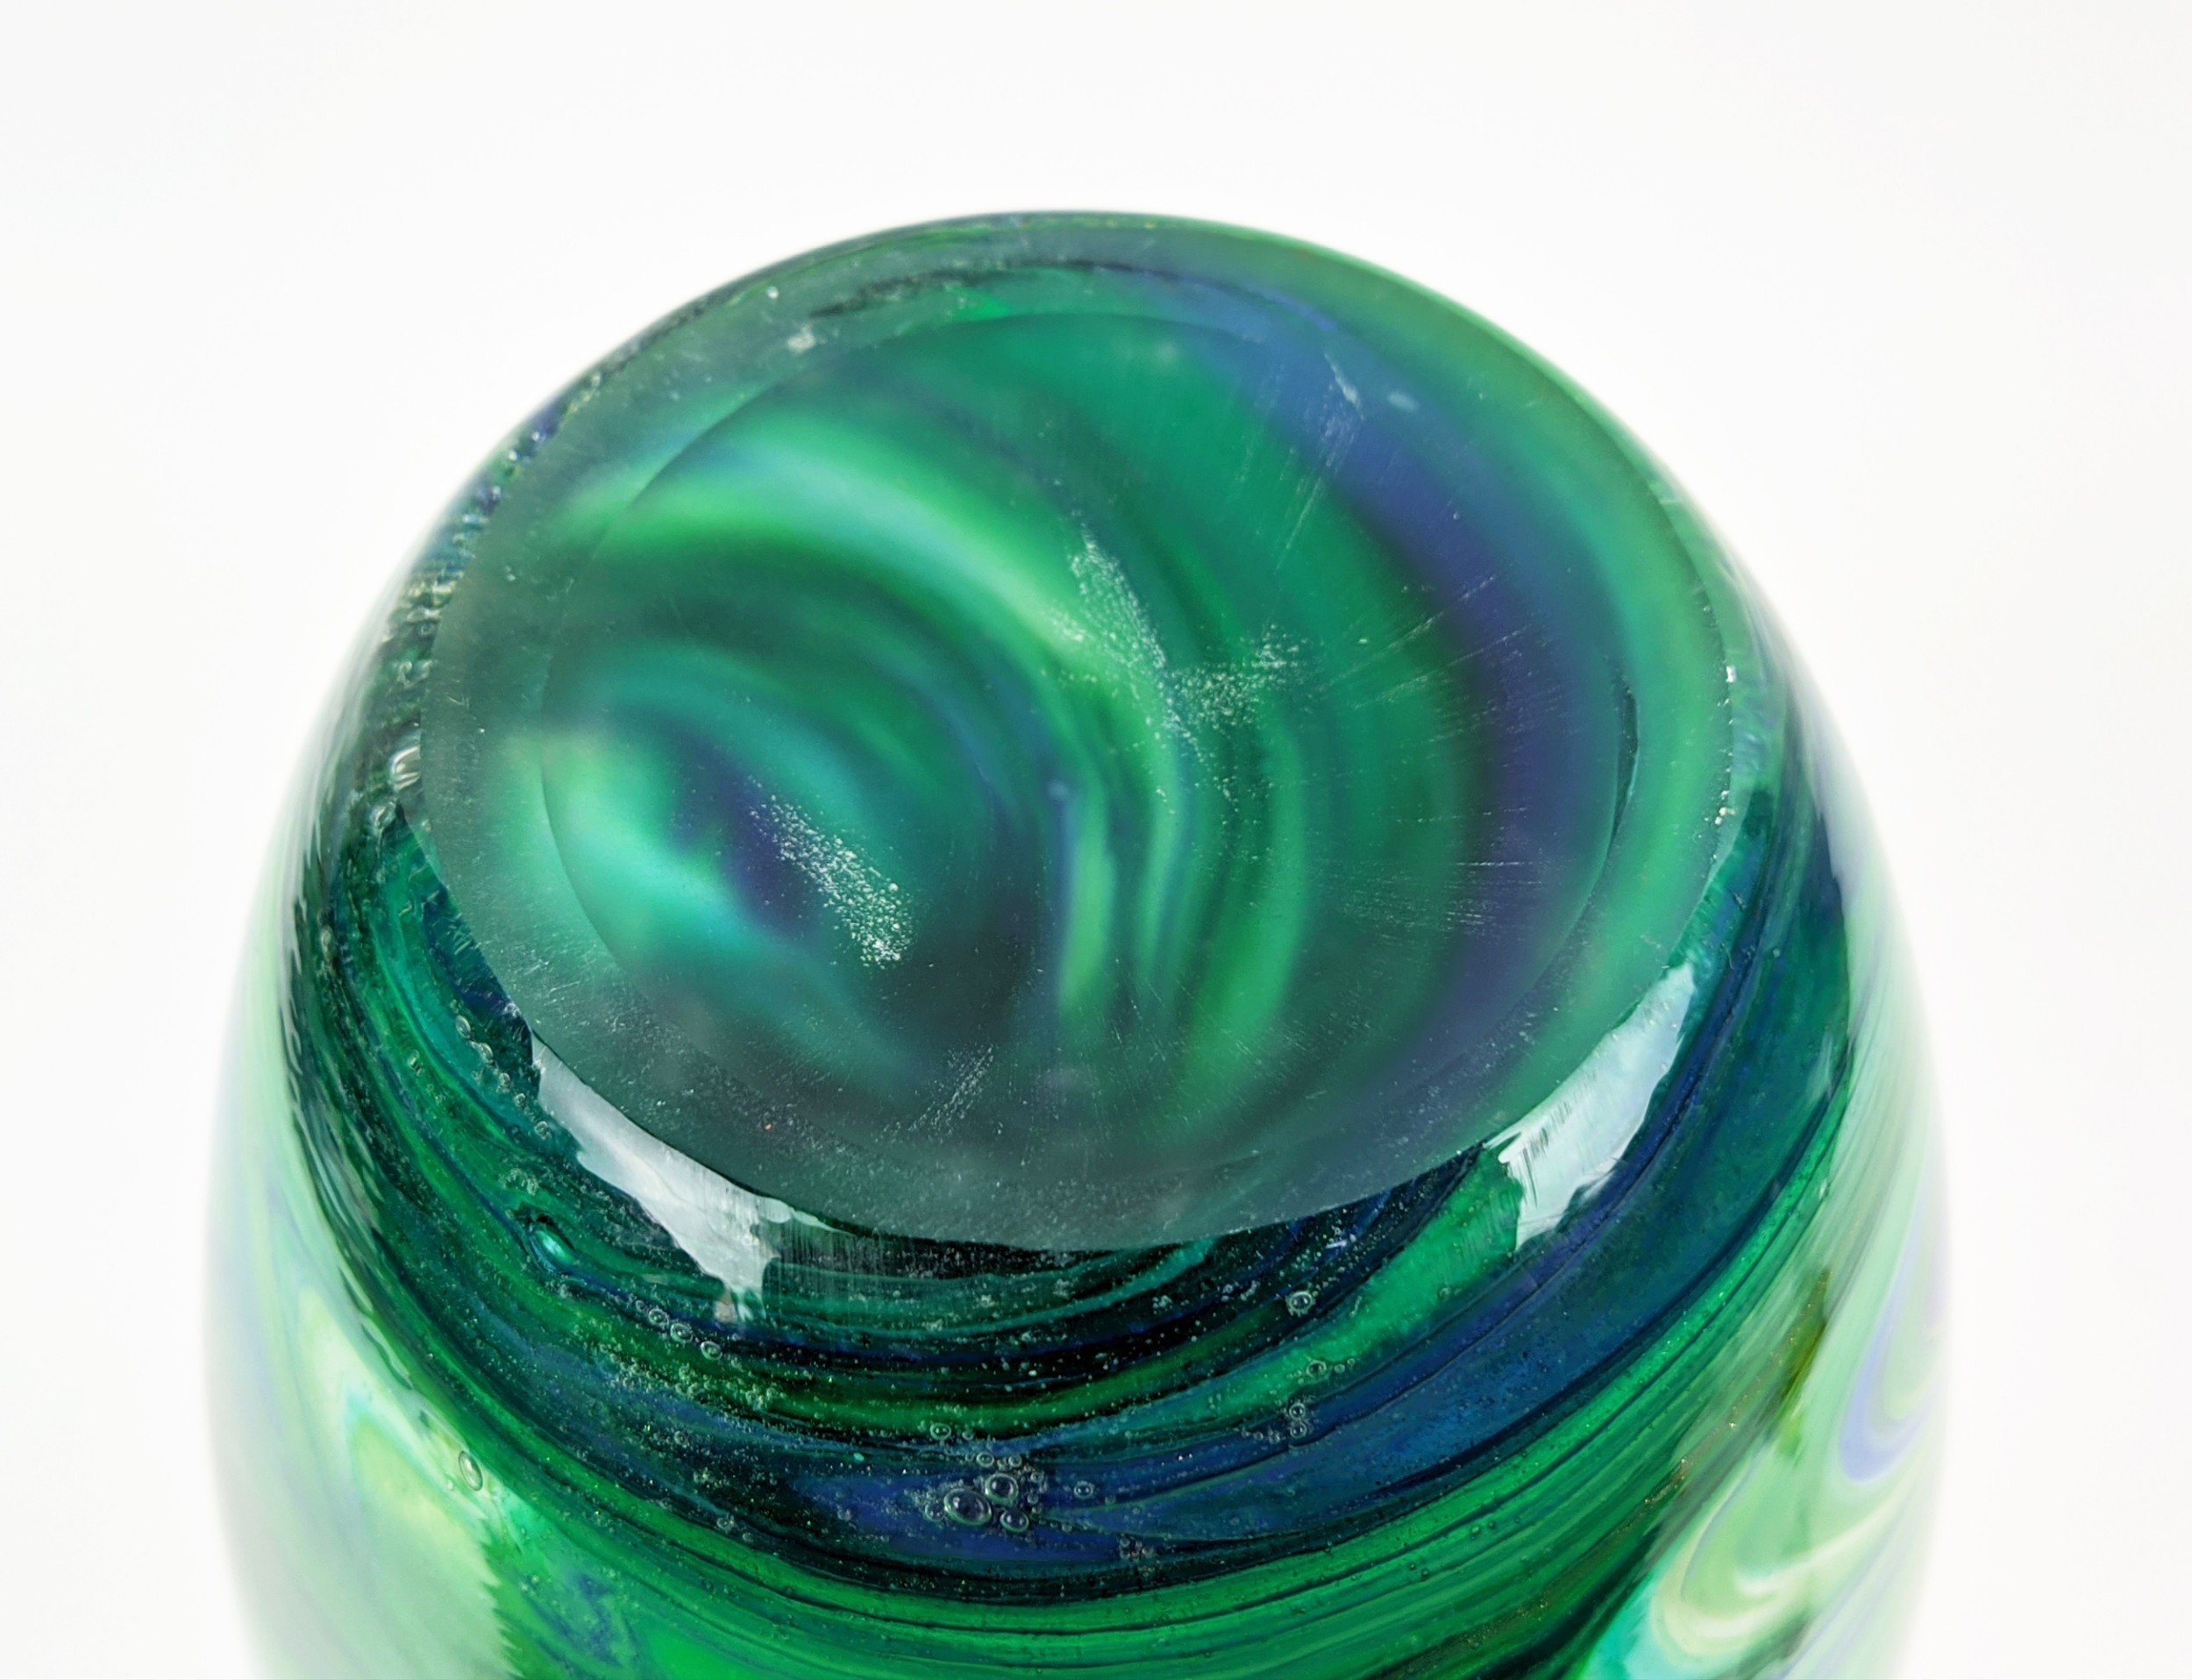 A MURANO GLASS VASE, of ovoid form, with a green, white and blue swirling pattern, gold flecks, 40cm - Image 7 of 7